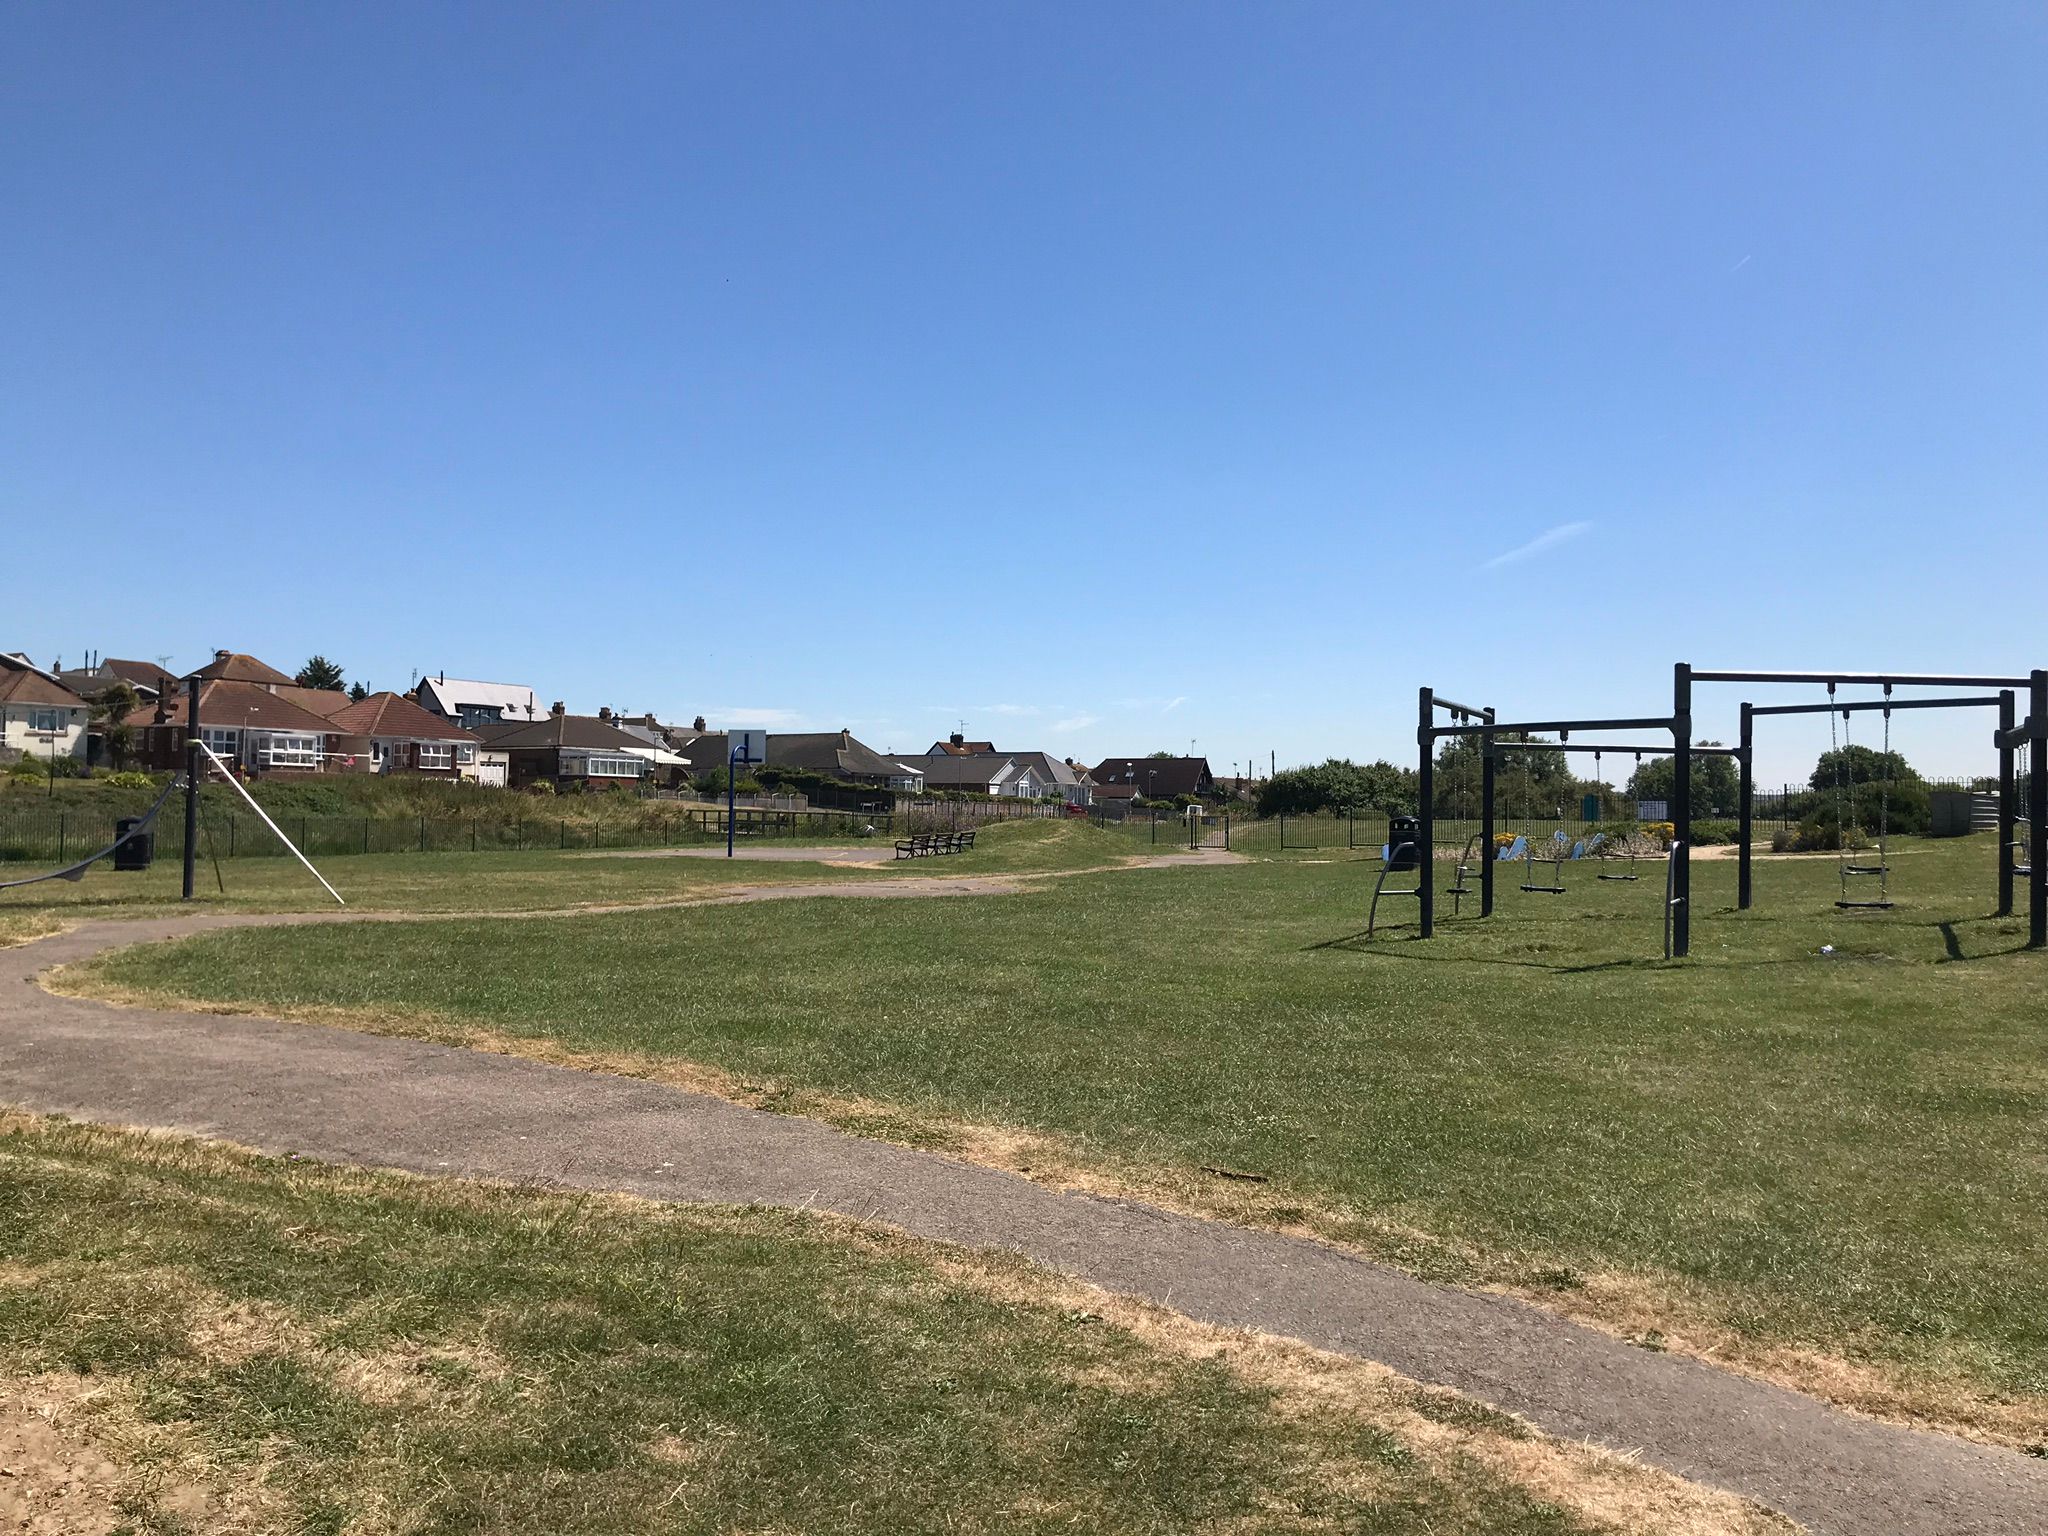 Hampton play area with a view of the circular swing set and basket ball court.